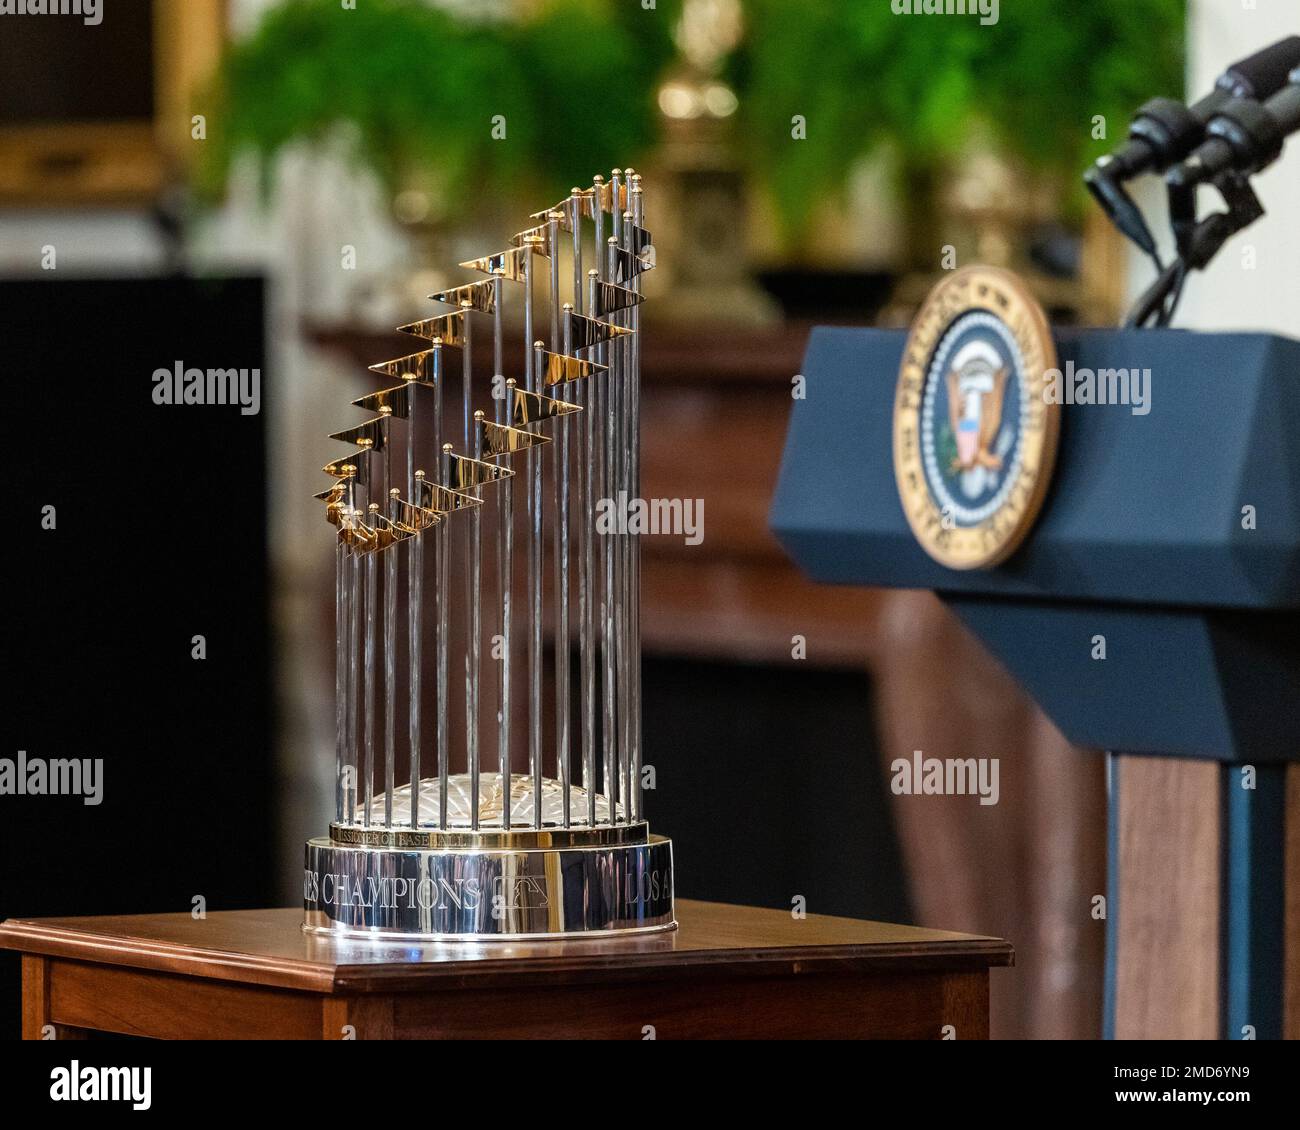 The Commissioner's Trophy is displayed during President Joe